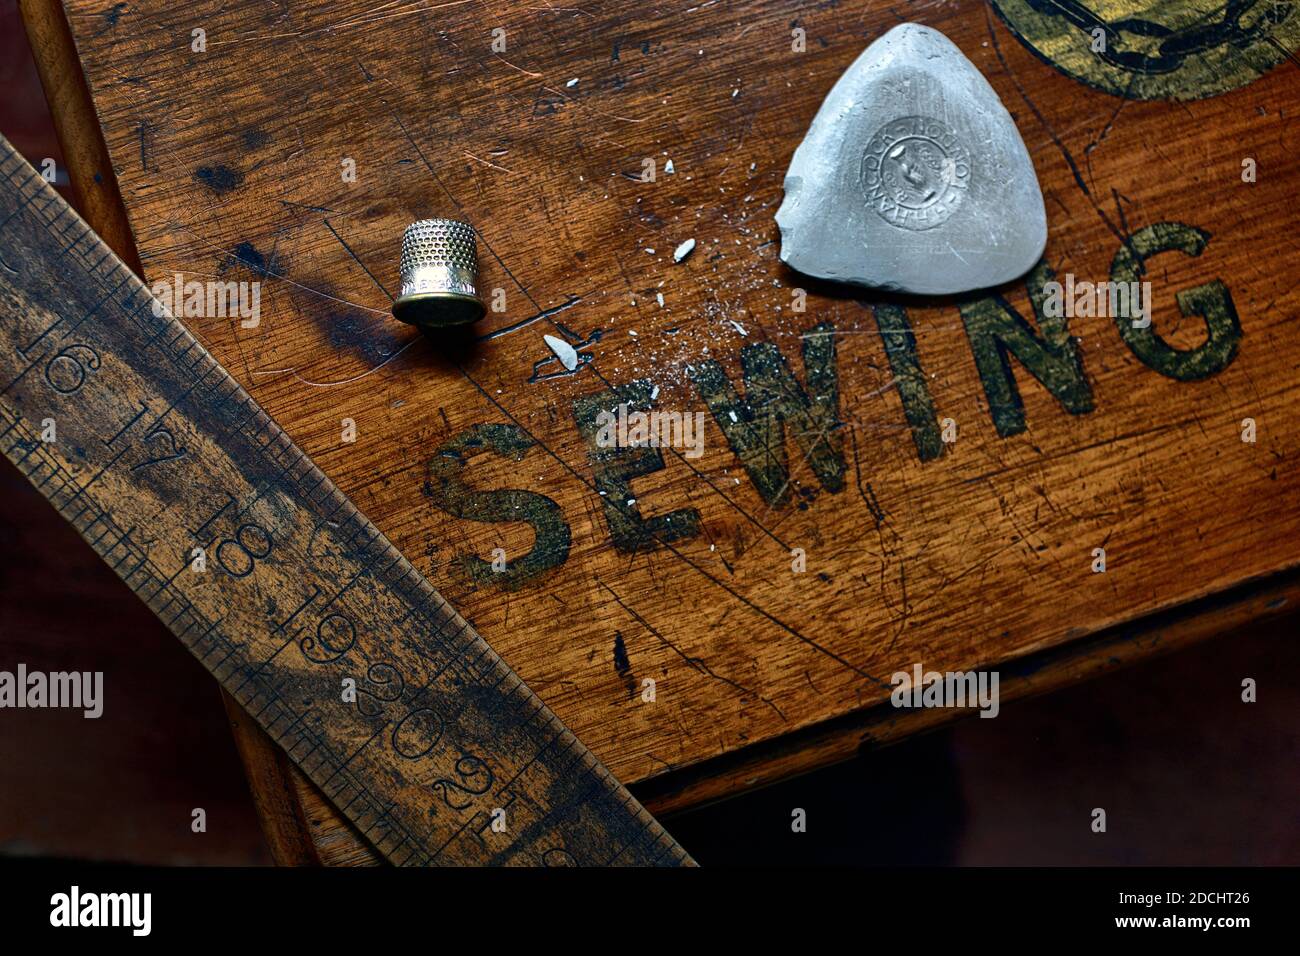 Wooden scale,chalk and thimble on wooden sewing table close up view at Dege & Skinner. Stock Photo